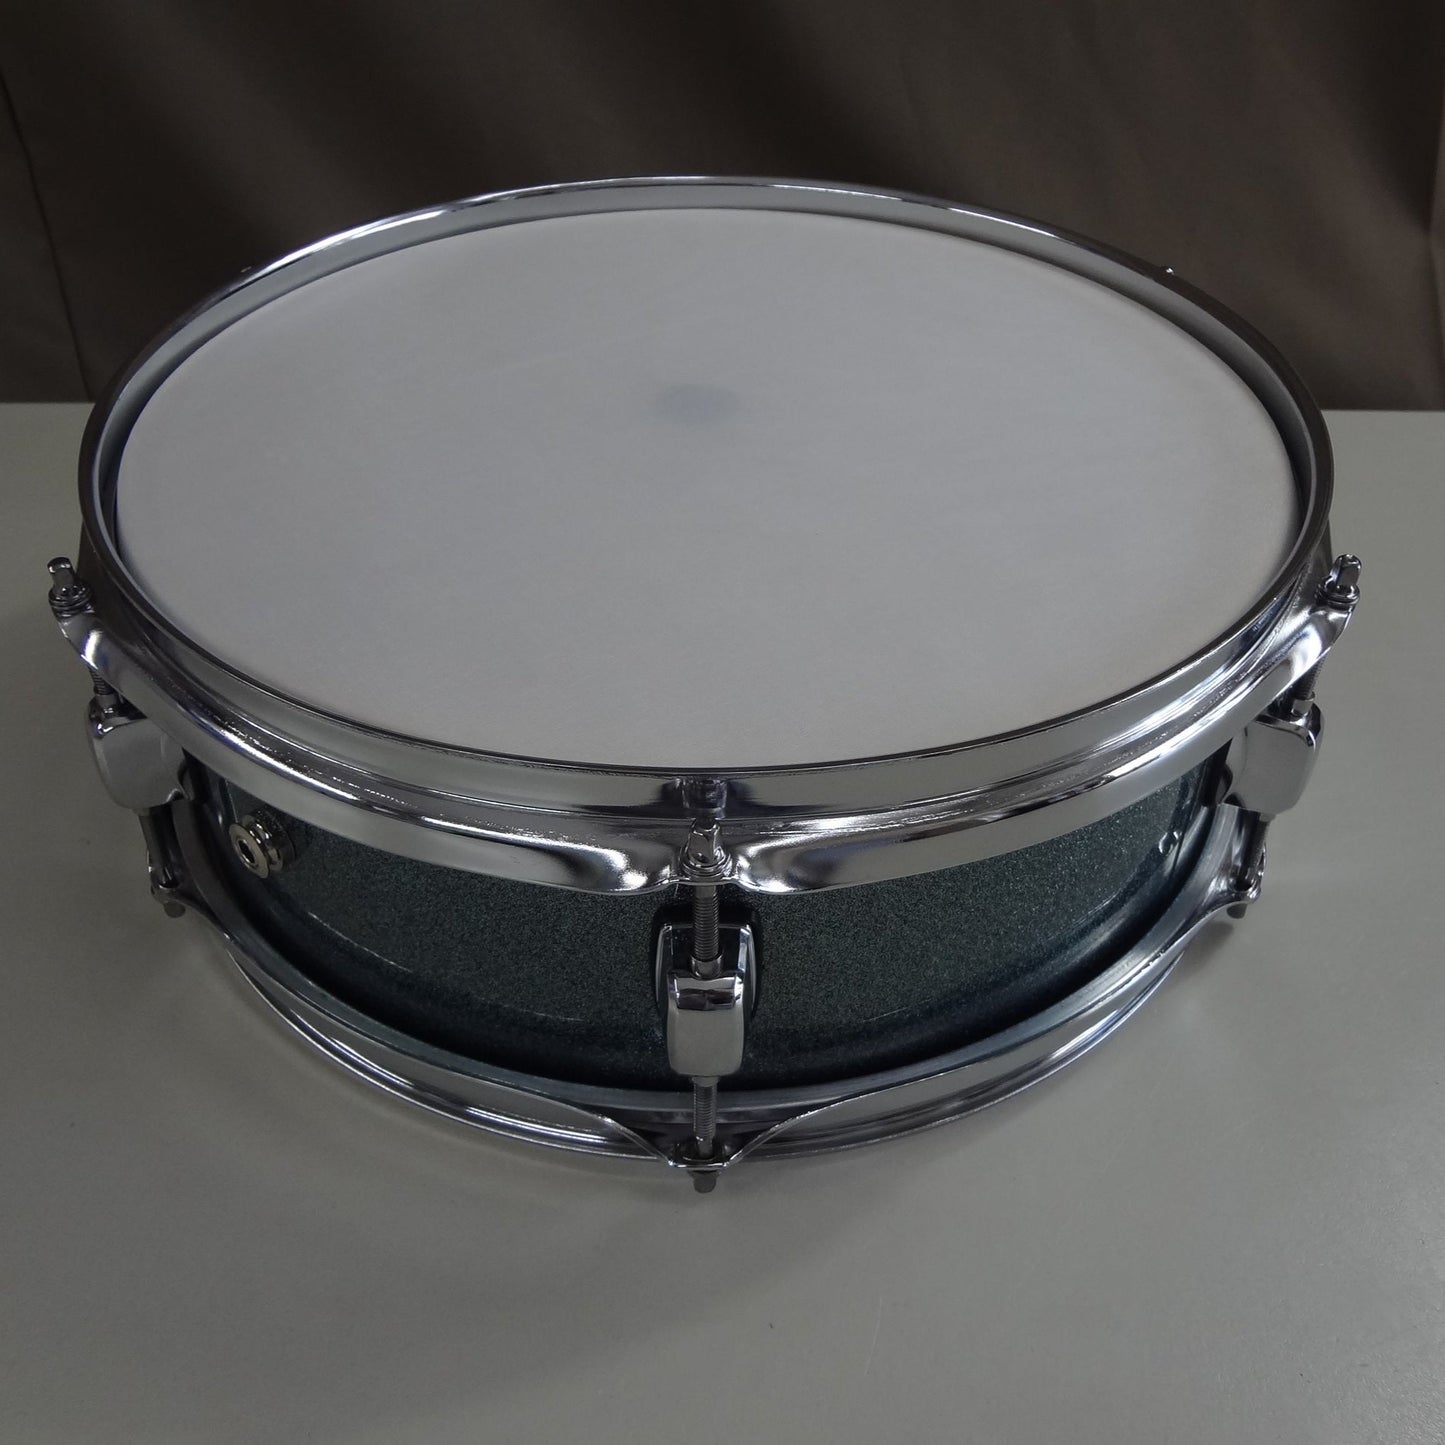 New 13 Inch Custom Electronic Snare Drum - Teal Sparkle